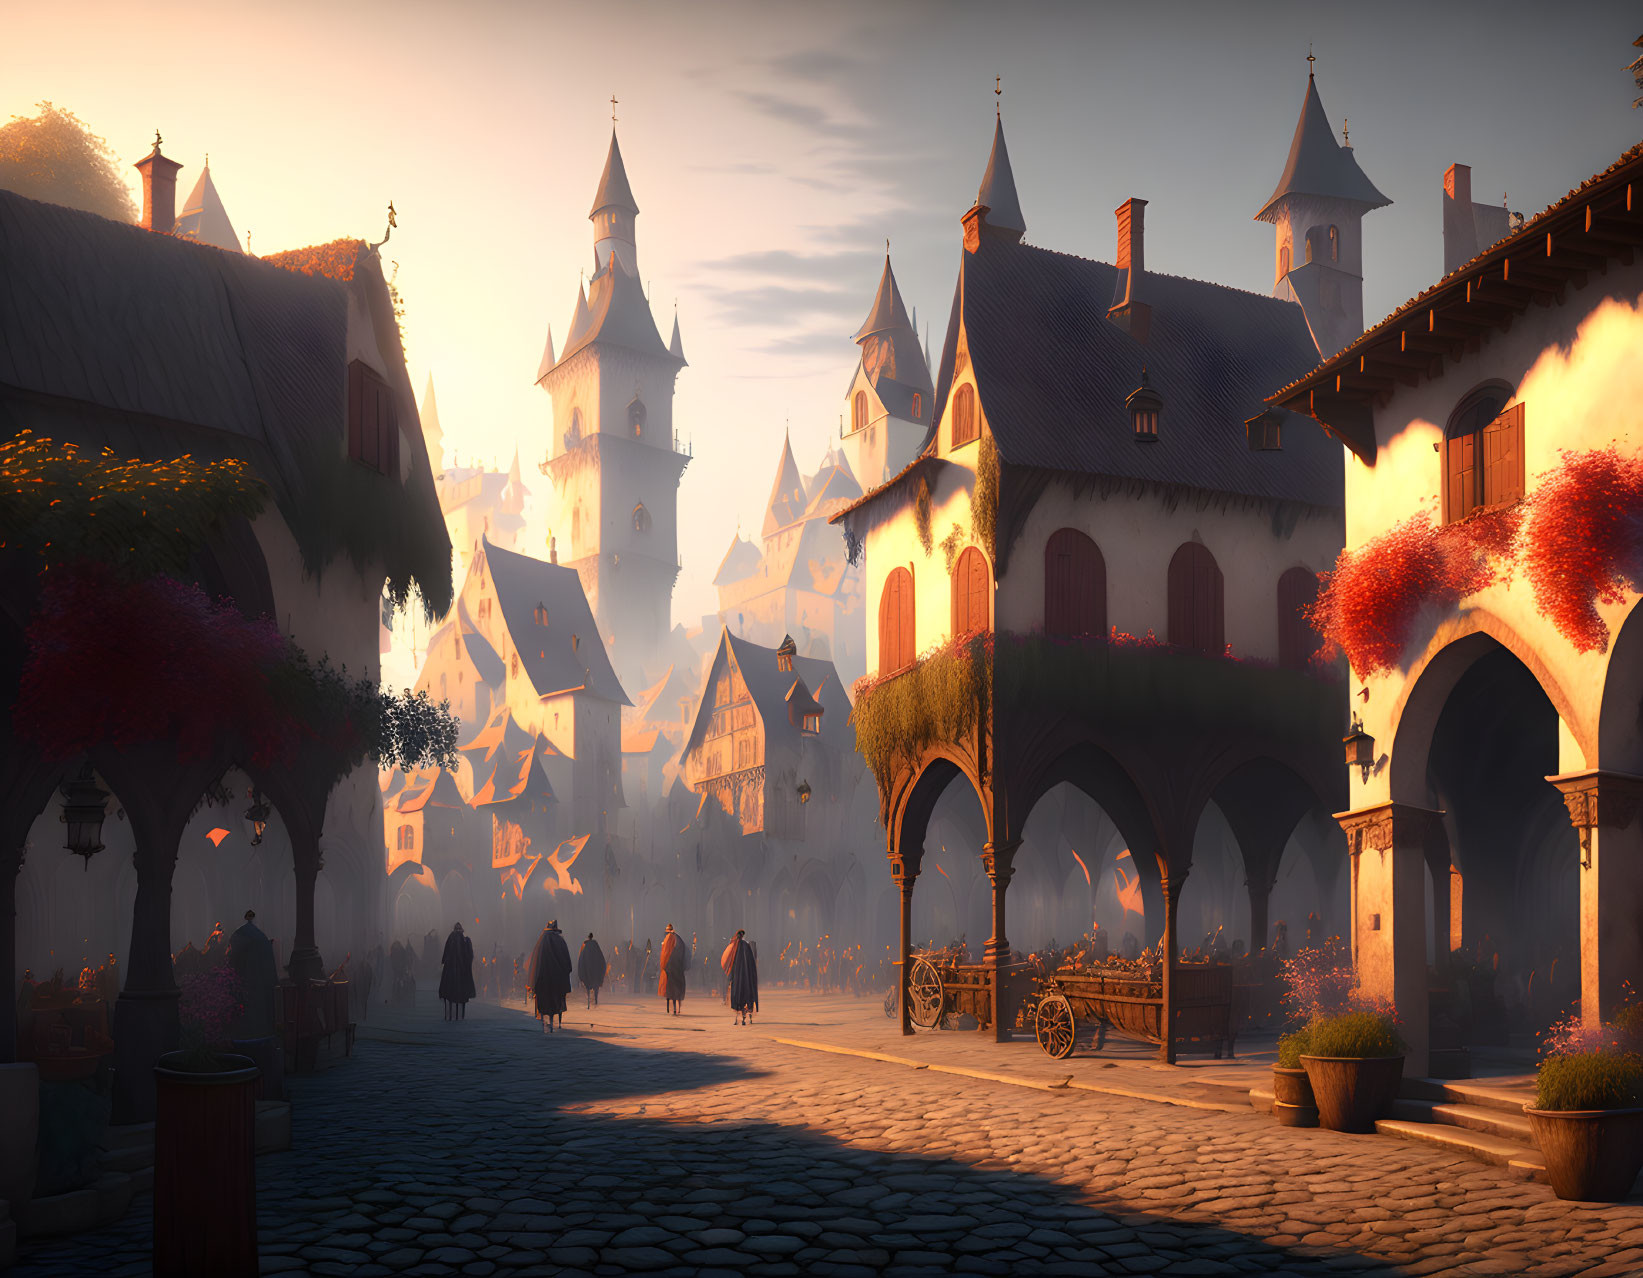 Medieval village at sunset: cobblestone streets, quaint houses, blooming trees.